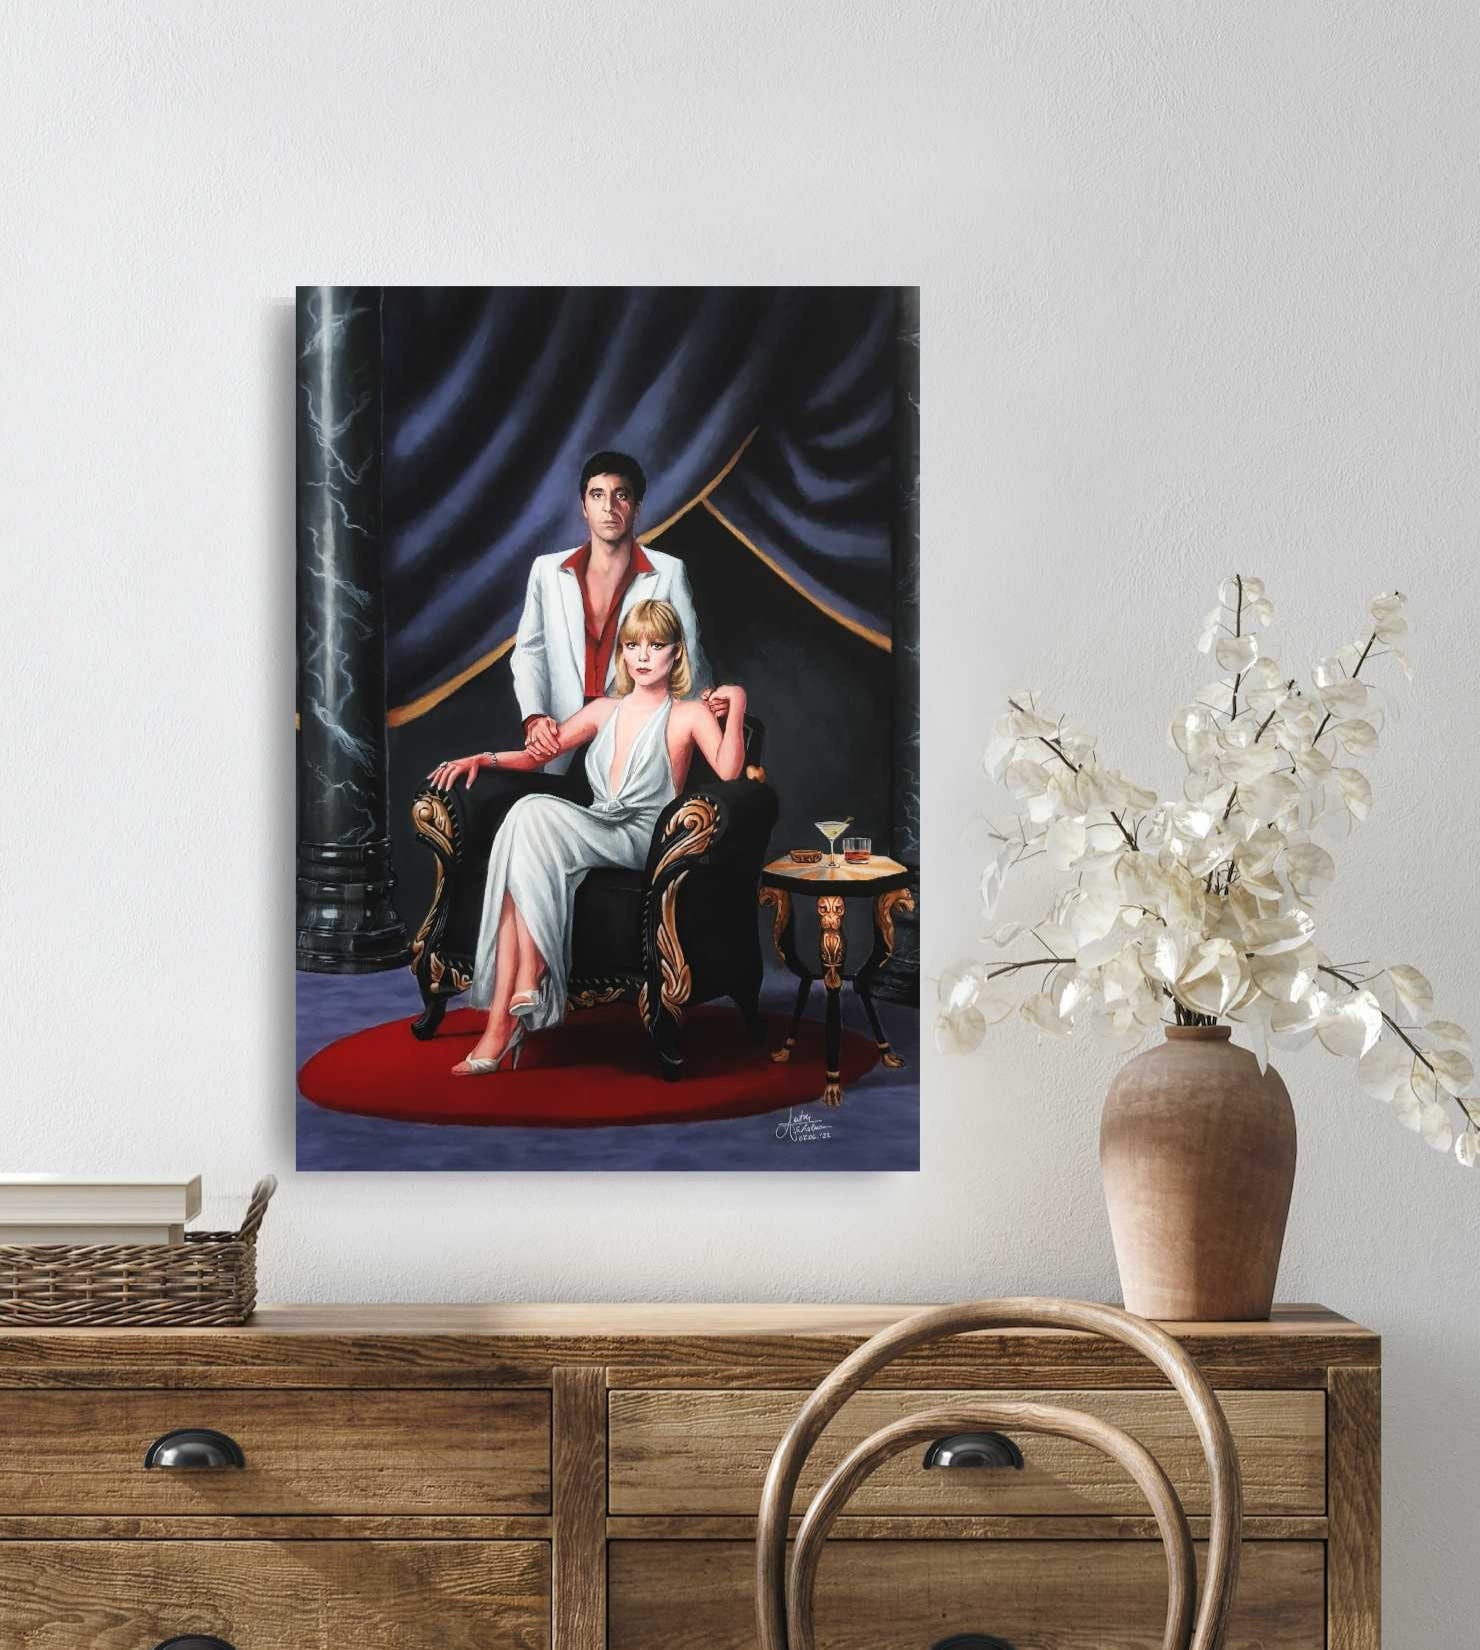 Modern Wall Art Poster Print of Al Pacino & Michelle Pfeiffer in Scarface,  Made After Original Painting nothing Exceeds Like Excess -  UK